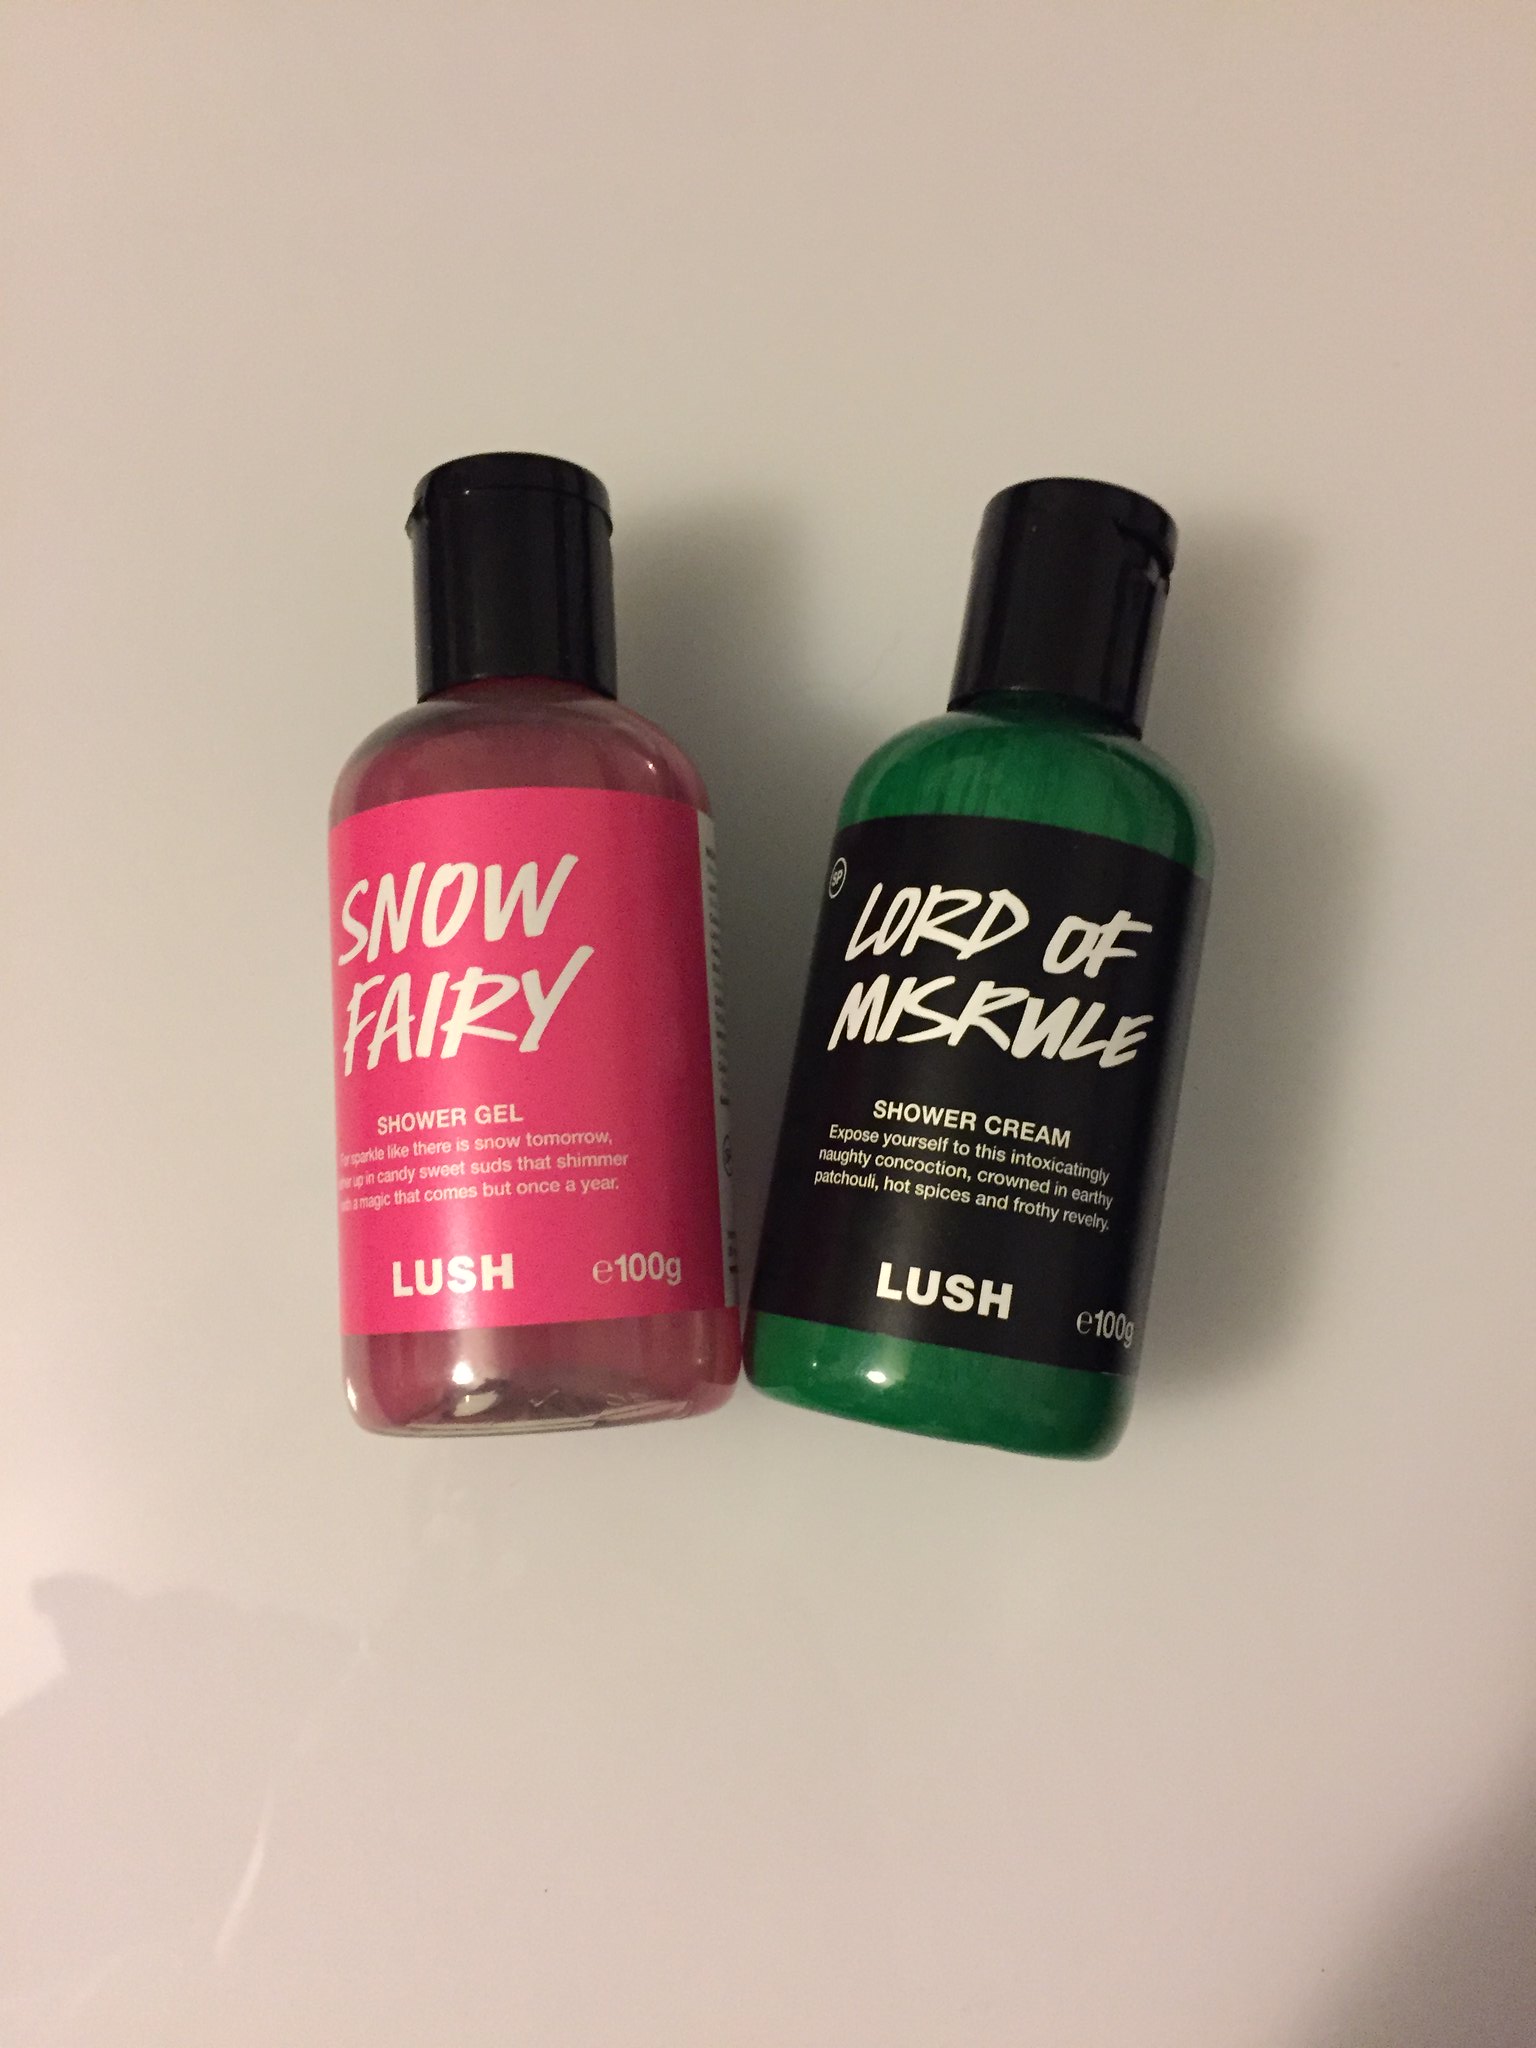 Lush Lord Of Misrule and Snow Fairy Shower Gel